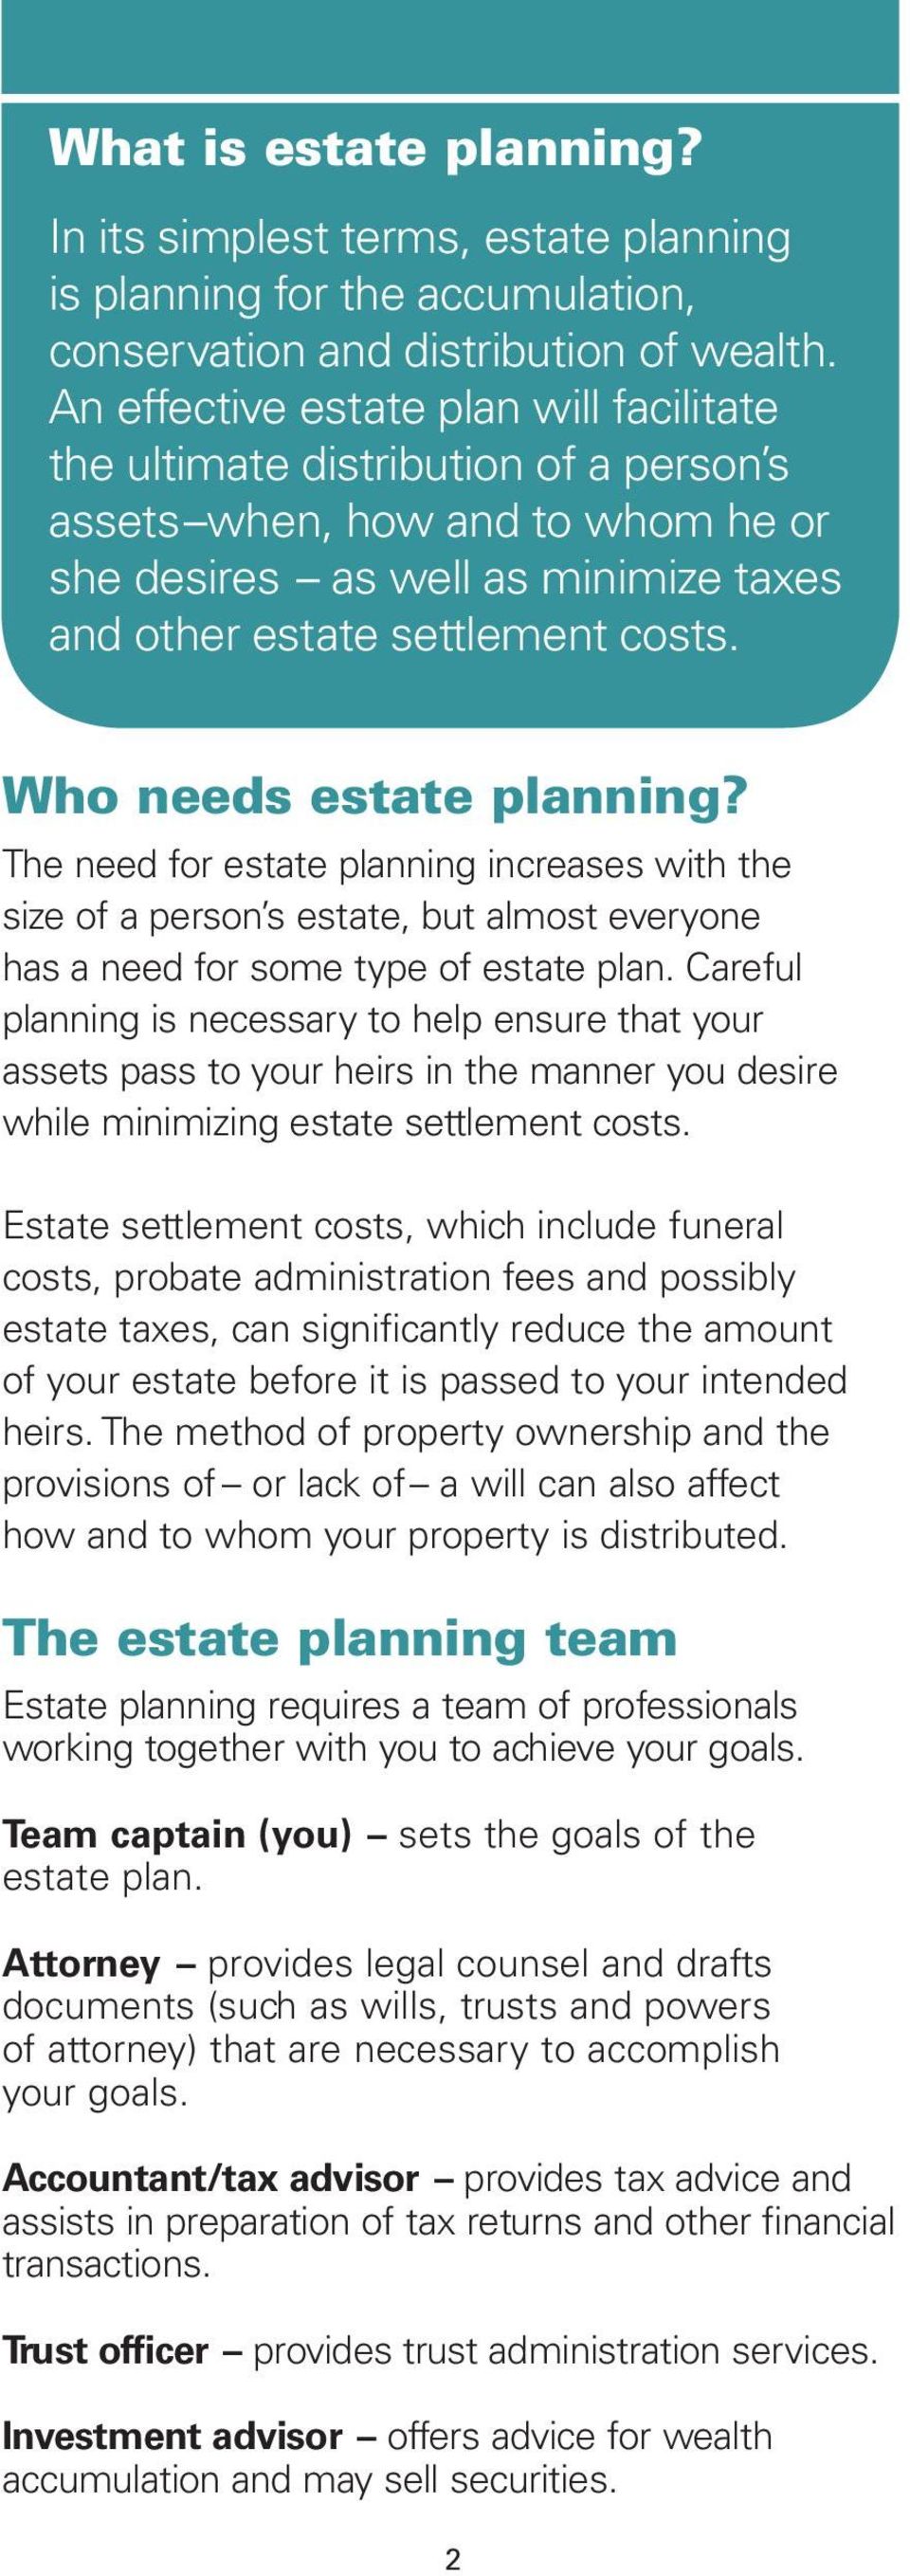 Who needs estate planning? The need for estate planning increases with the size of a person s estate, but almost everyone has a need for some type of estate plan.